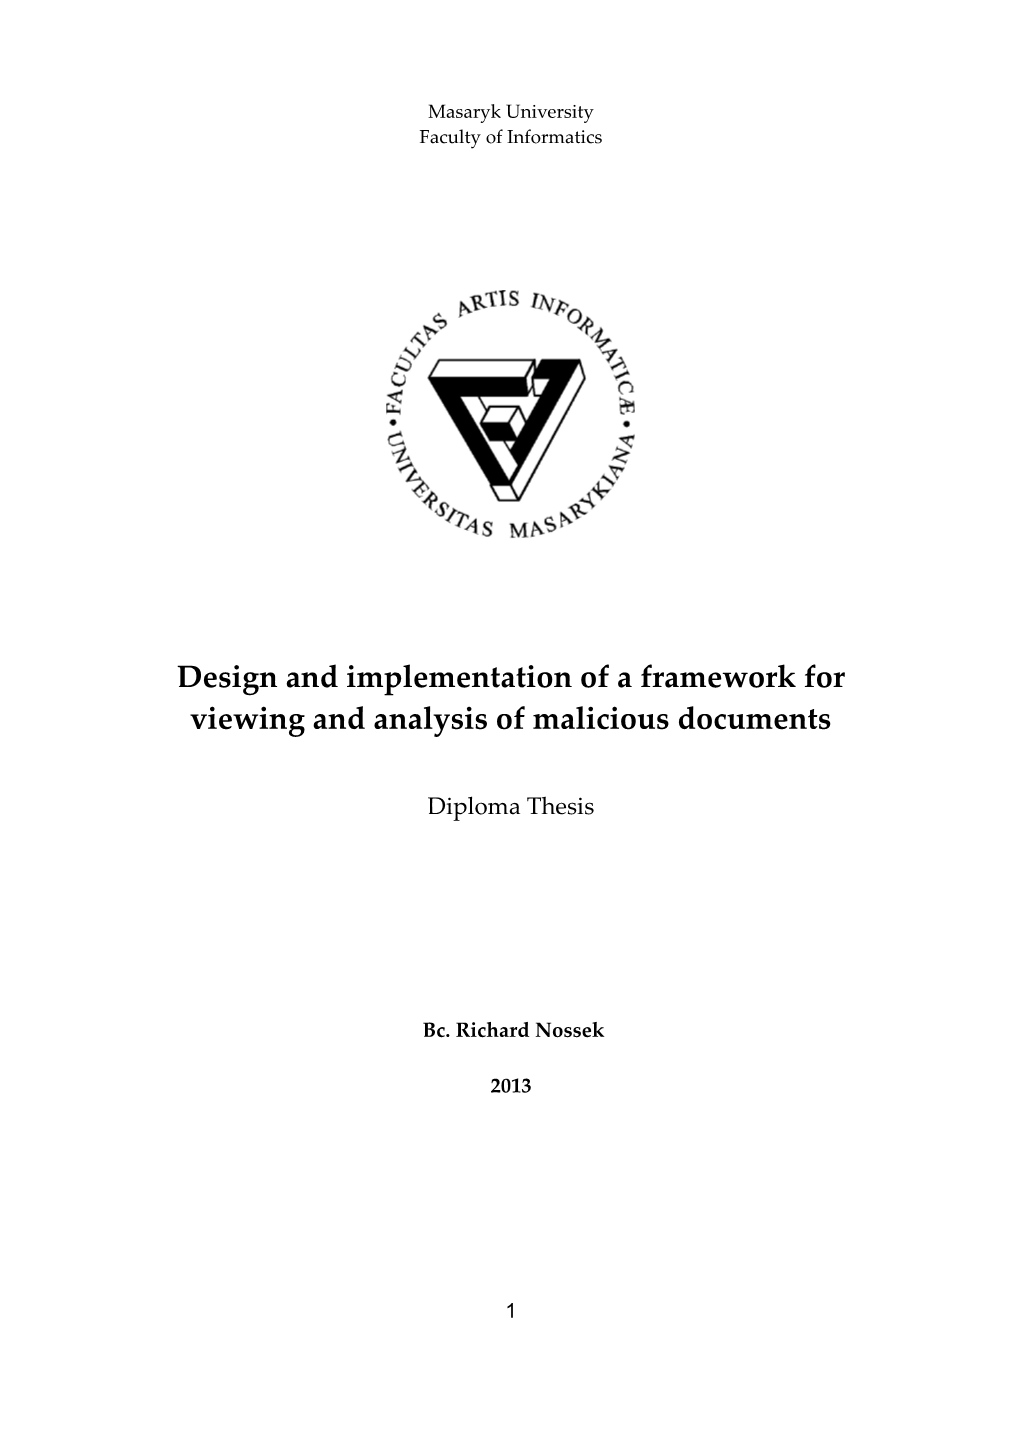 Design and Implementation of a Framework for Viewing and Analysis of Malicious Documents